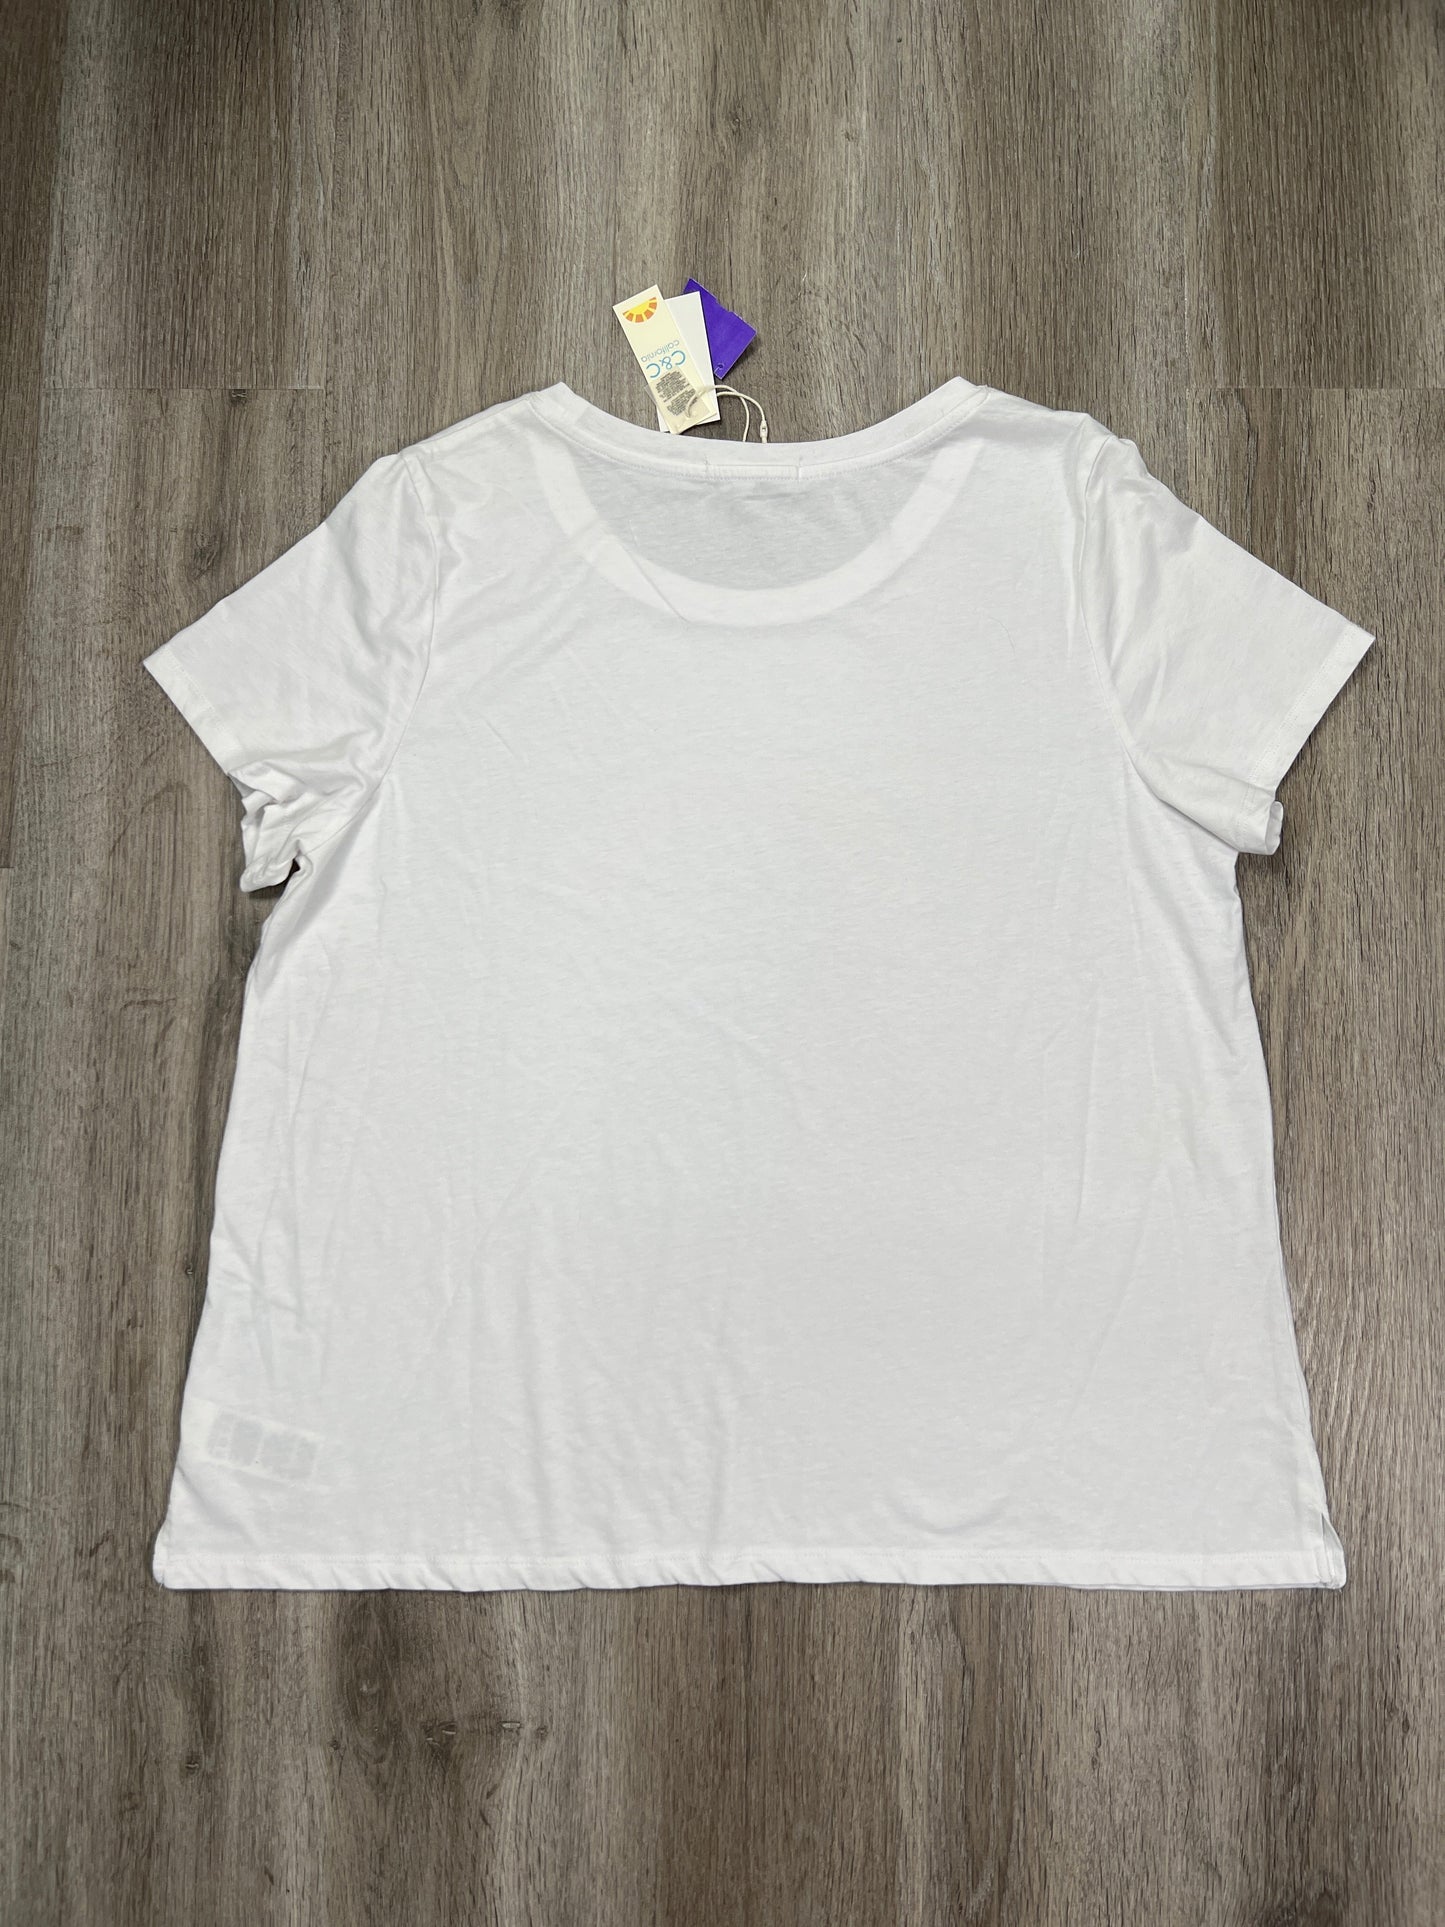 White Top Short Sleeve C And C, Size 2x